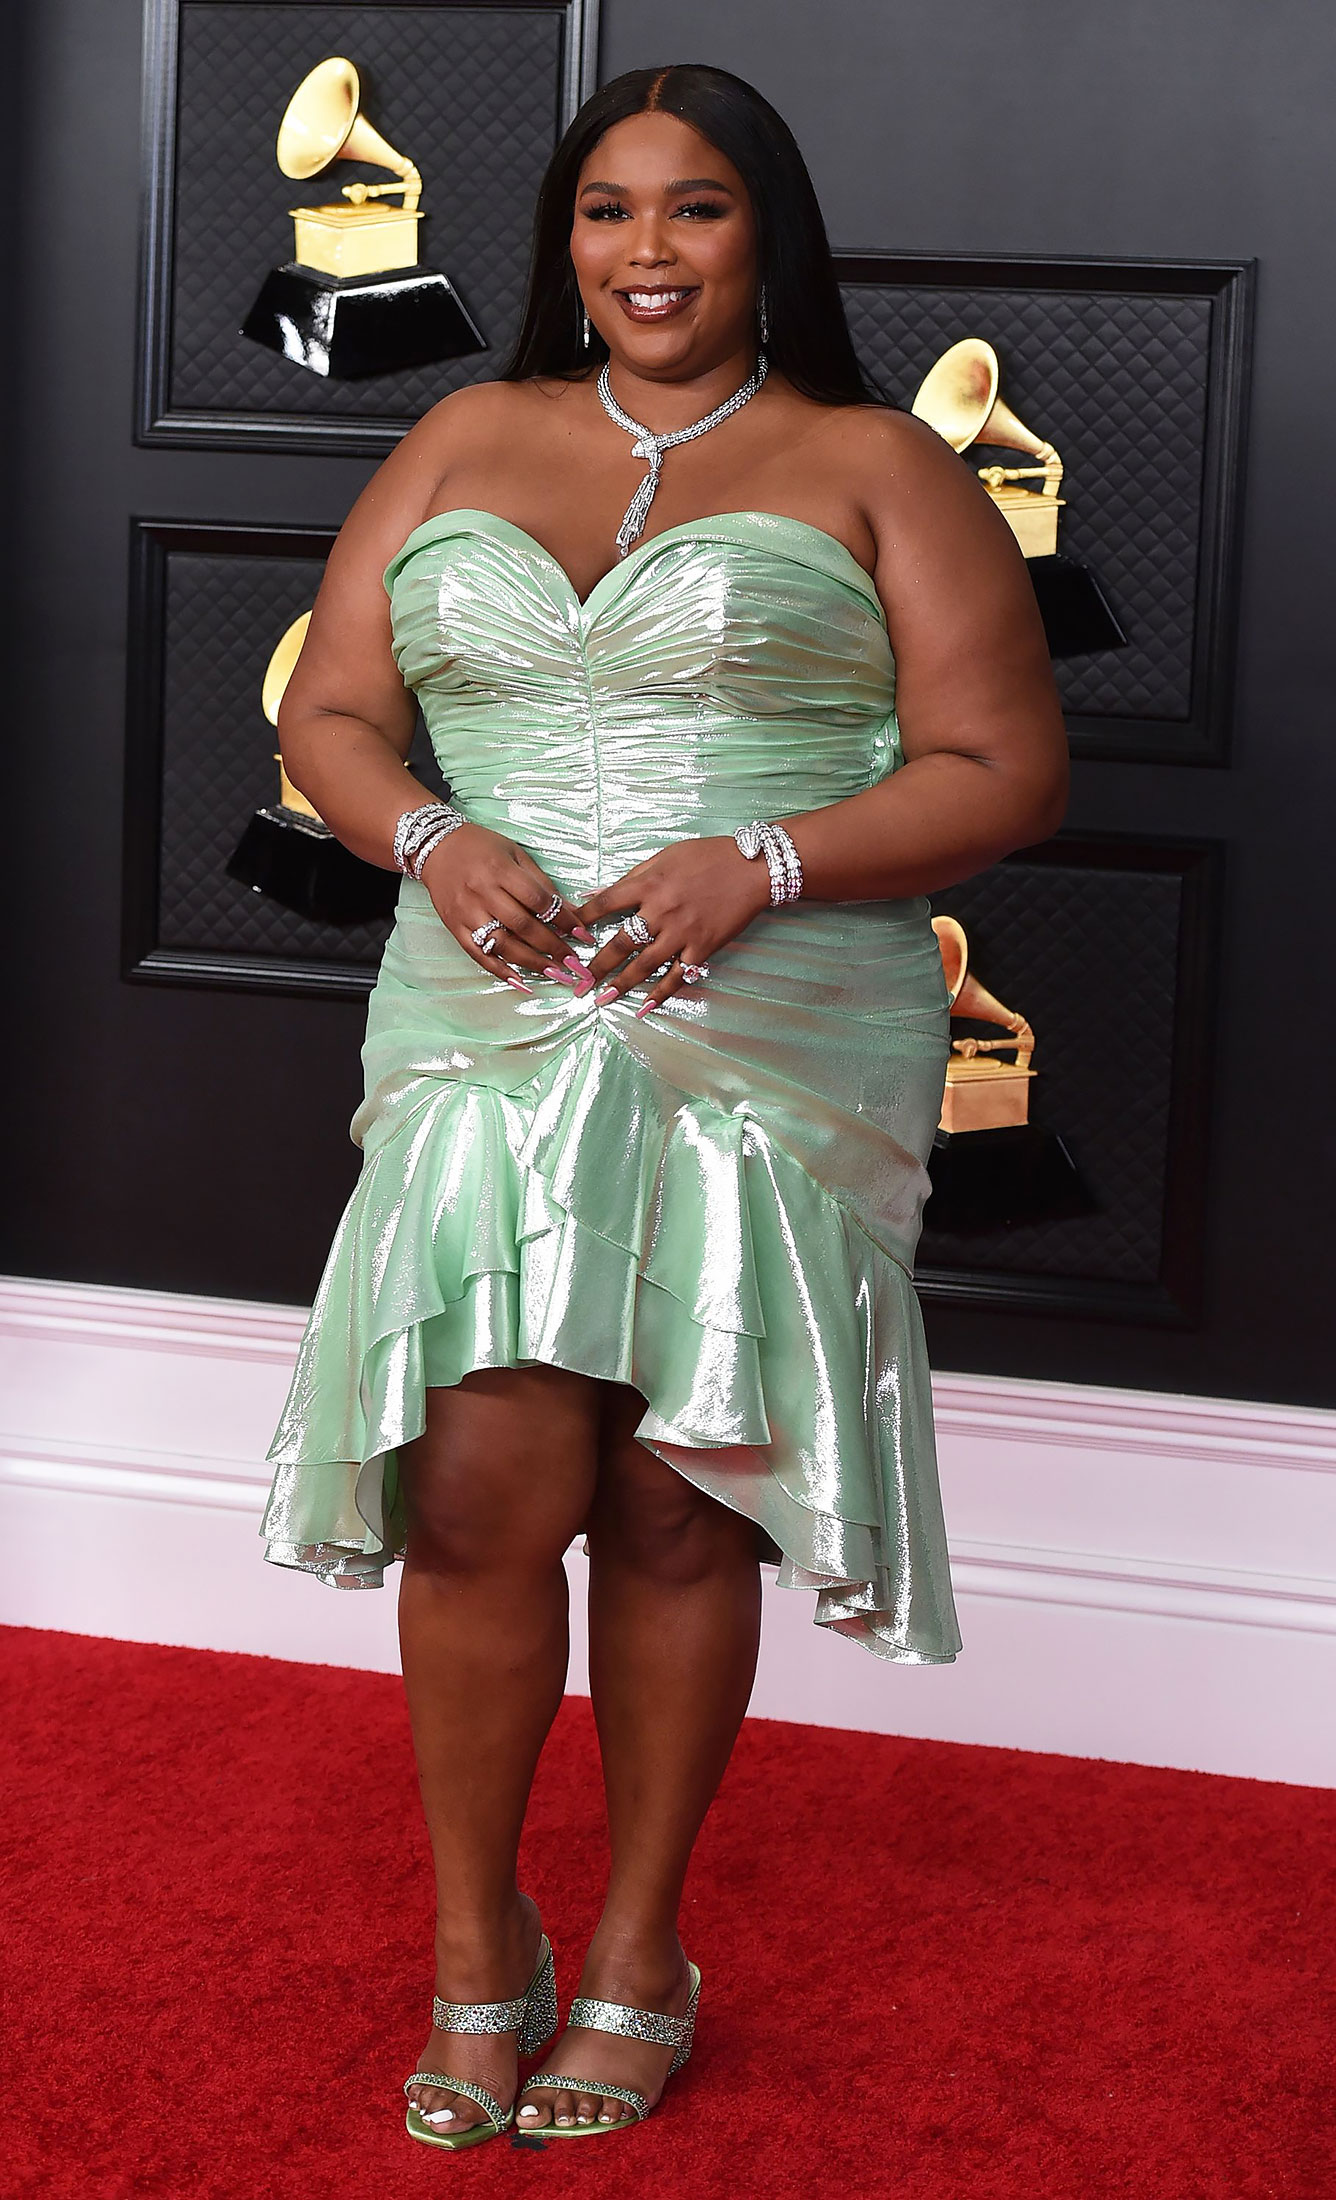 2021 Grammy Awards Red Carpet Arrivals - Lizzo